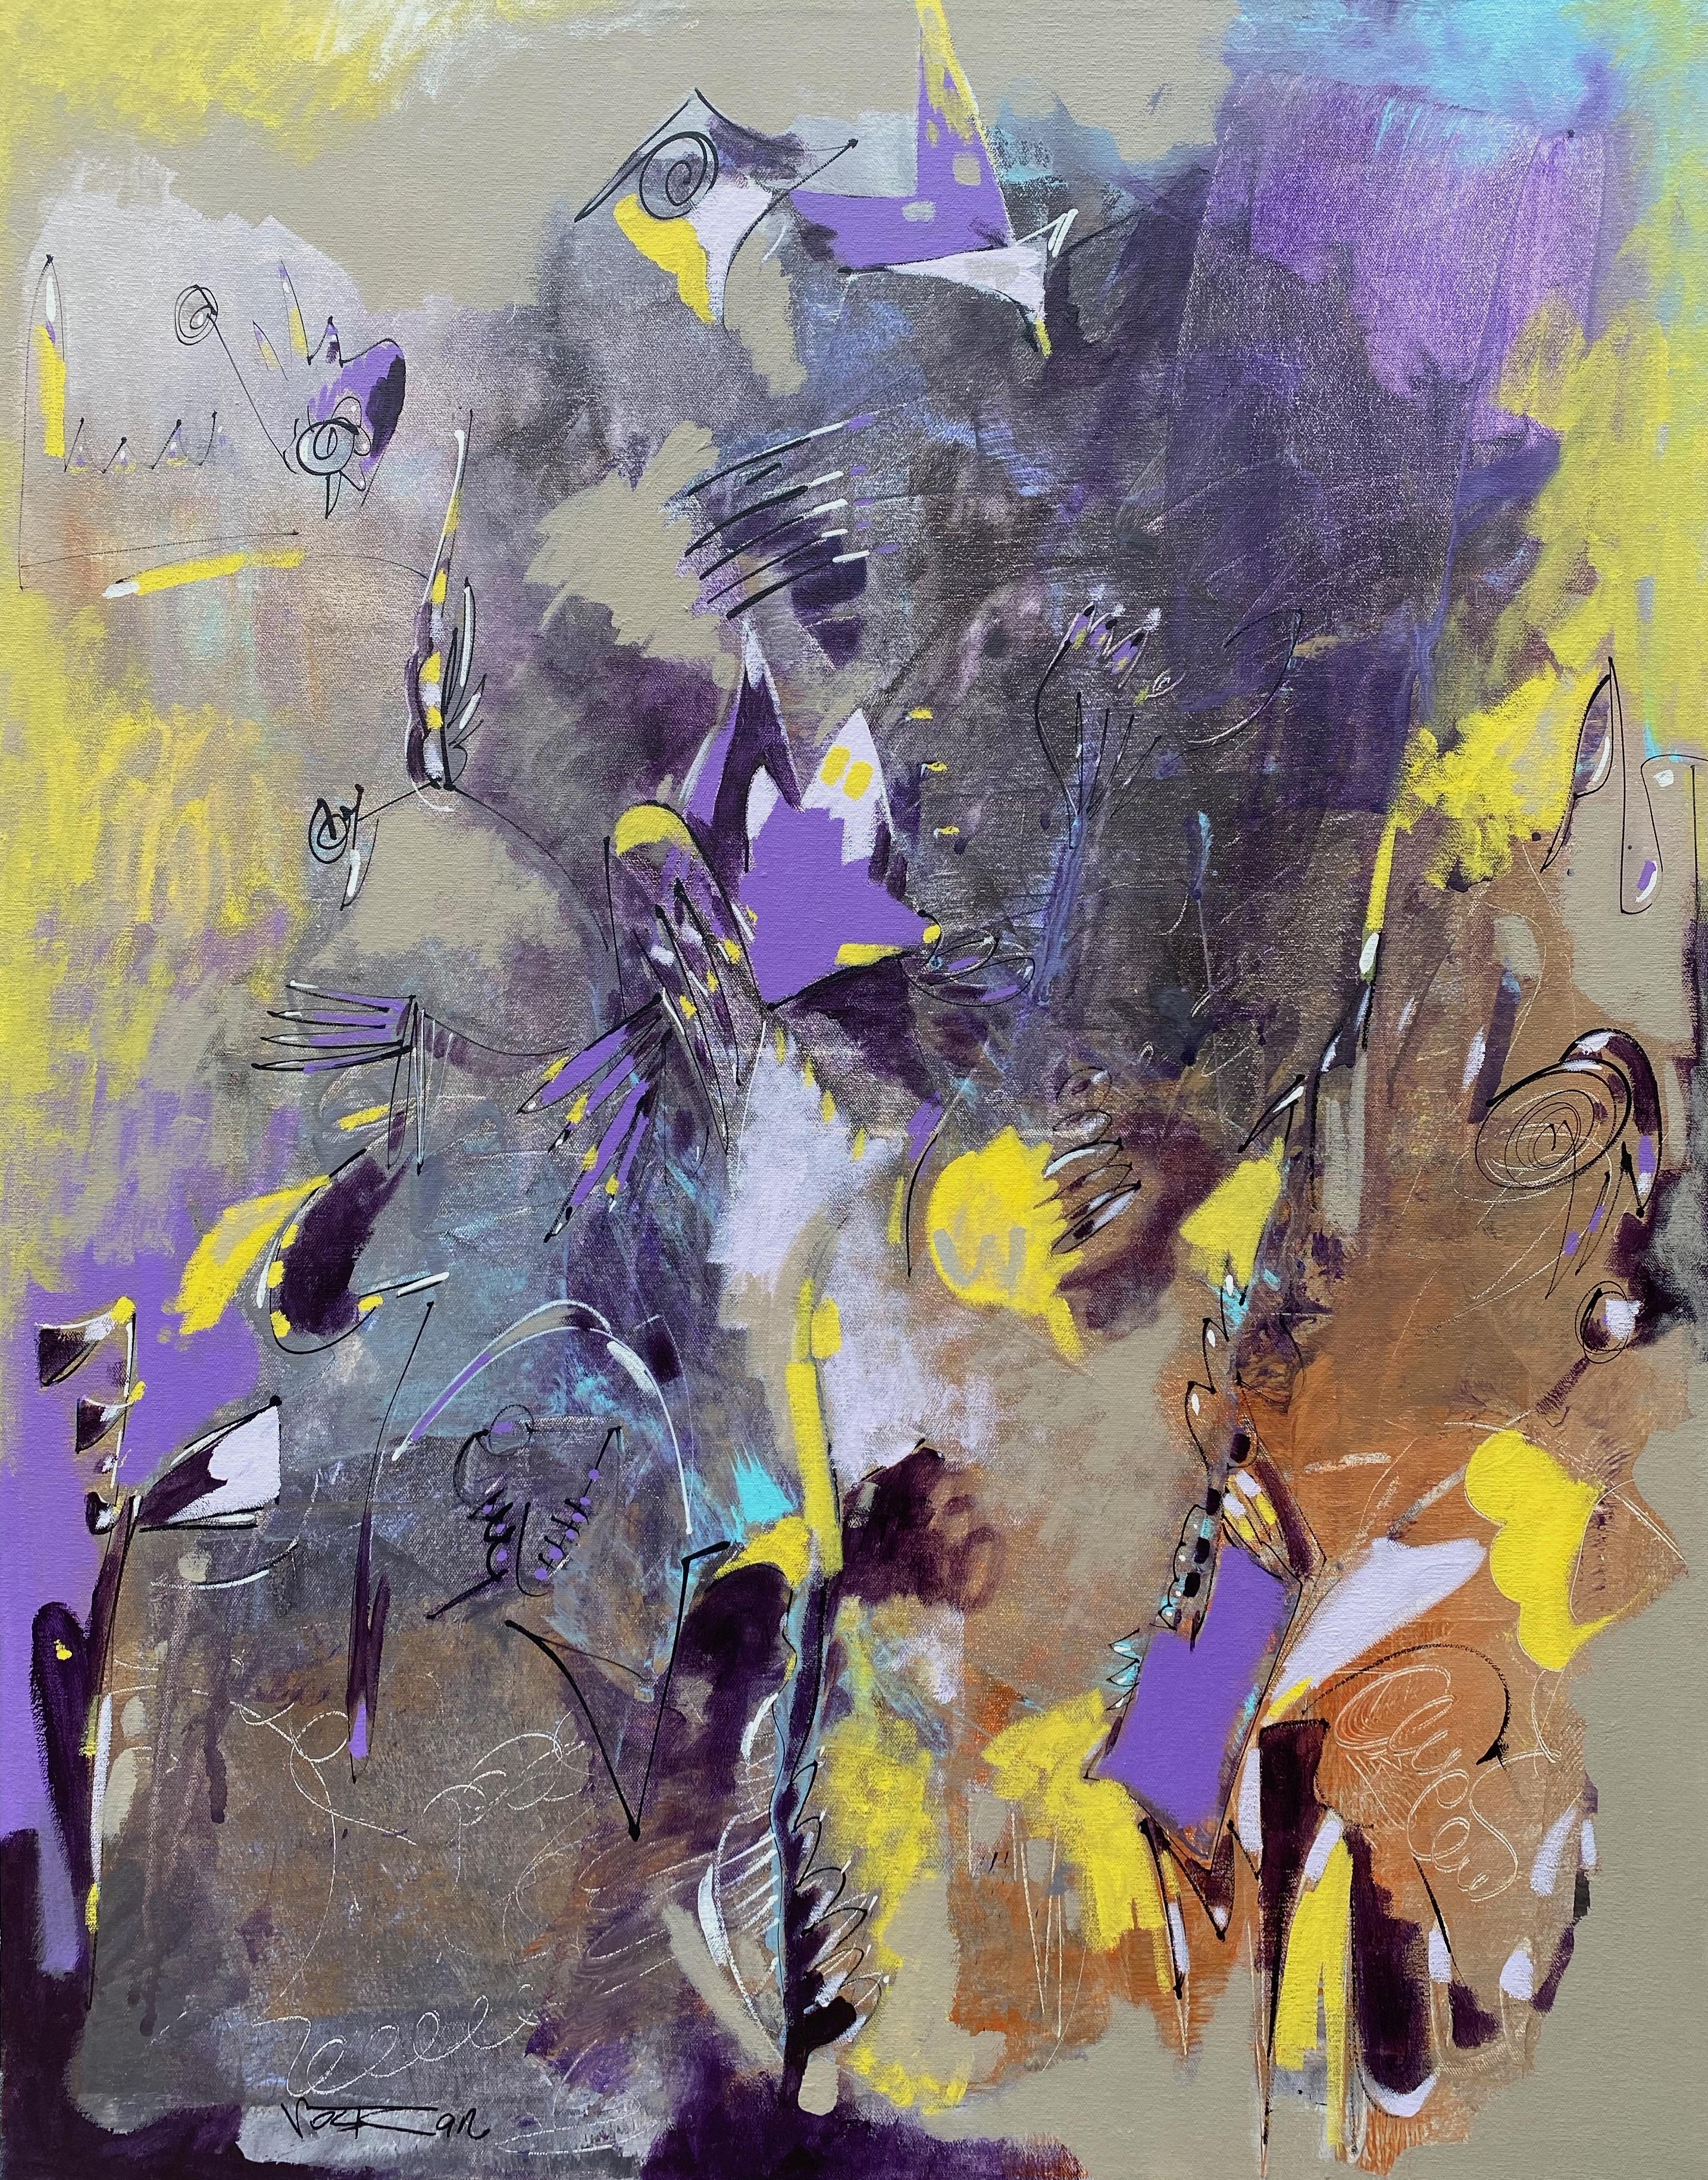 Lavender in Abstract, Original Acrylic Painting, Ready to Hang